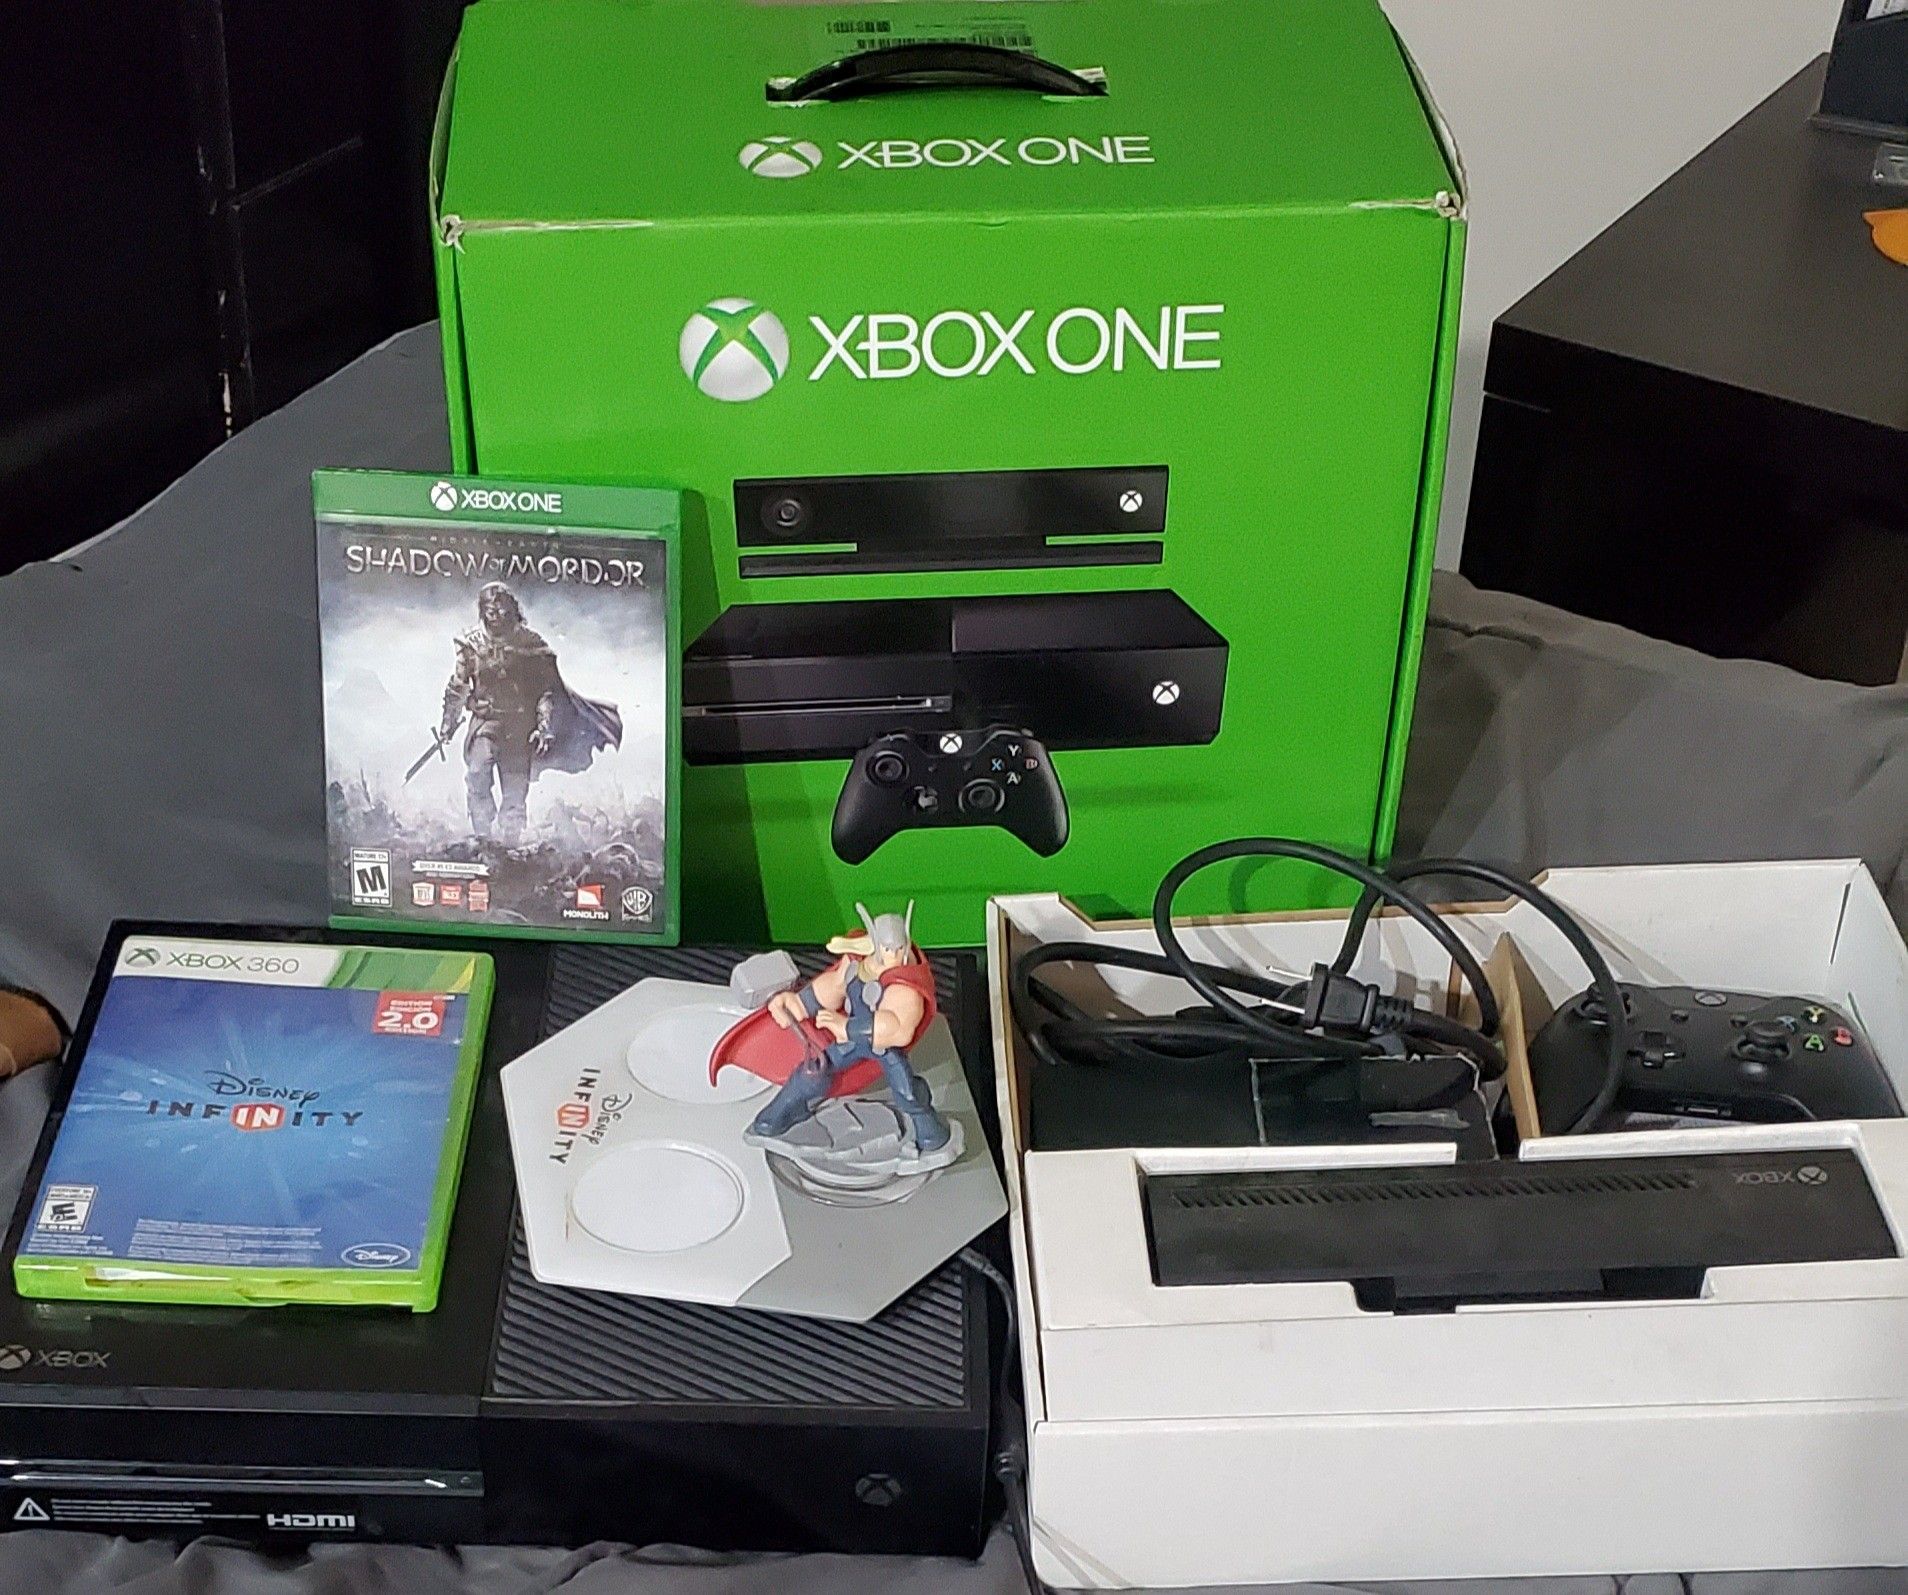 Xbox one with controller 5 games (gta v, burnout, hydro thunder, Disney infinity, shadow of mordor) controller, box and power cable